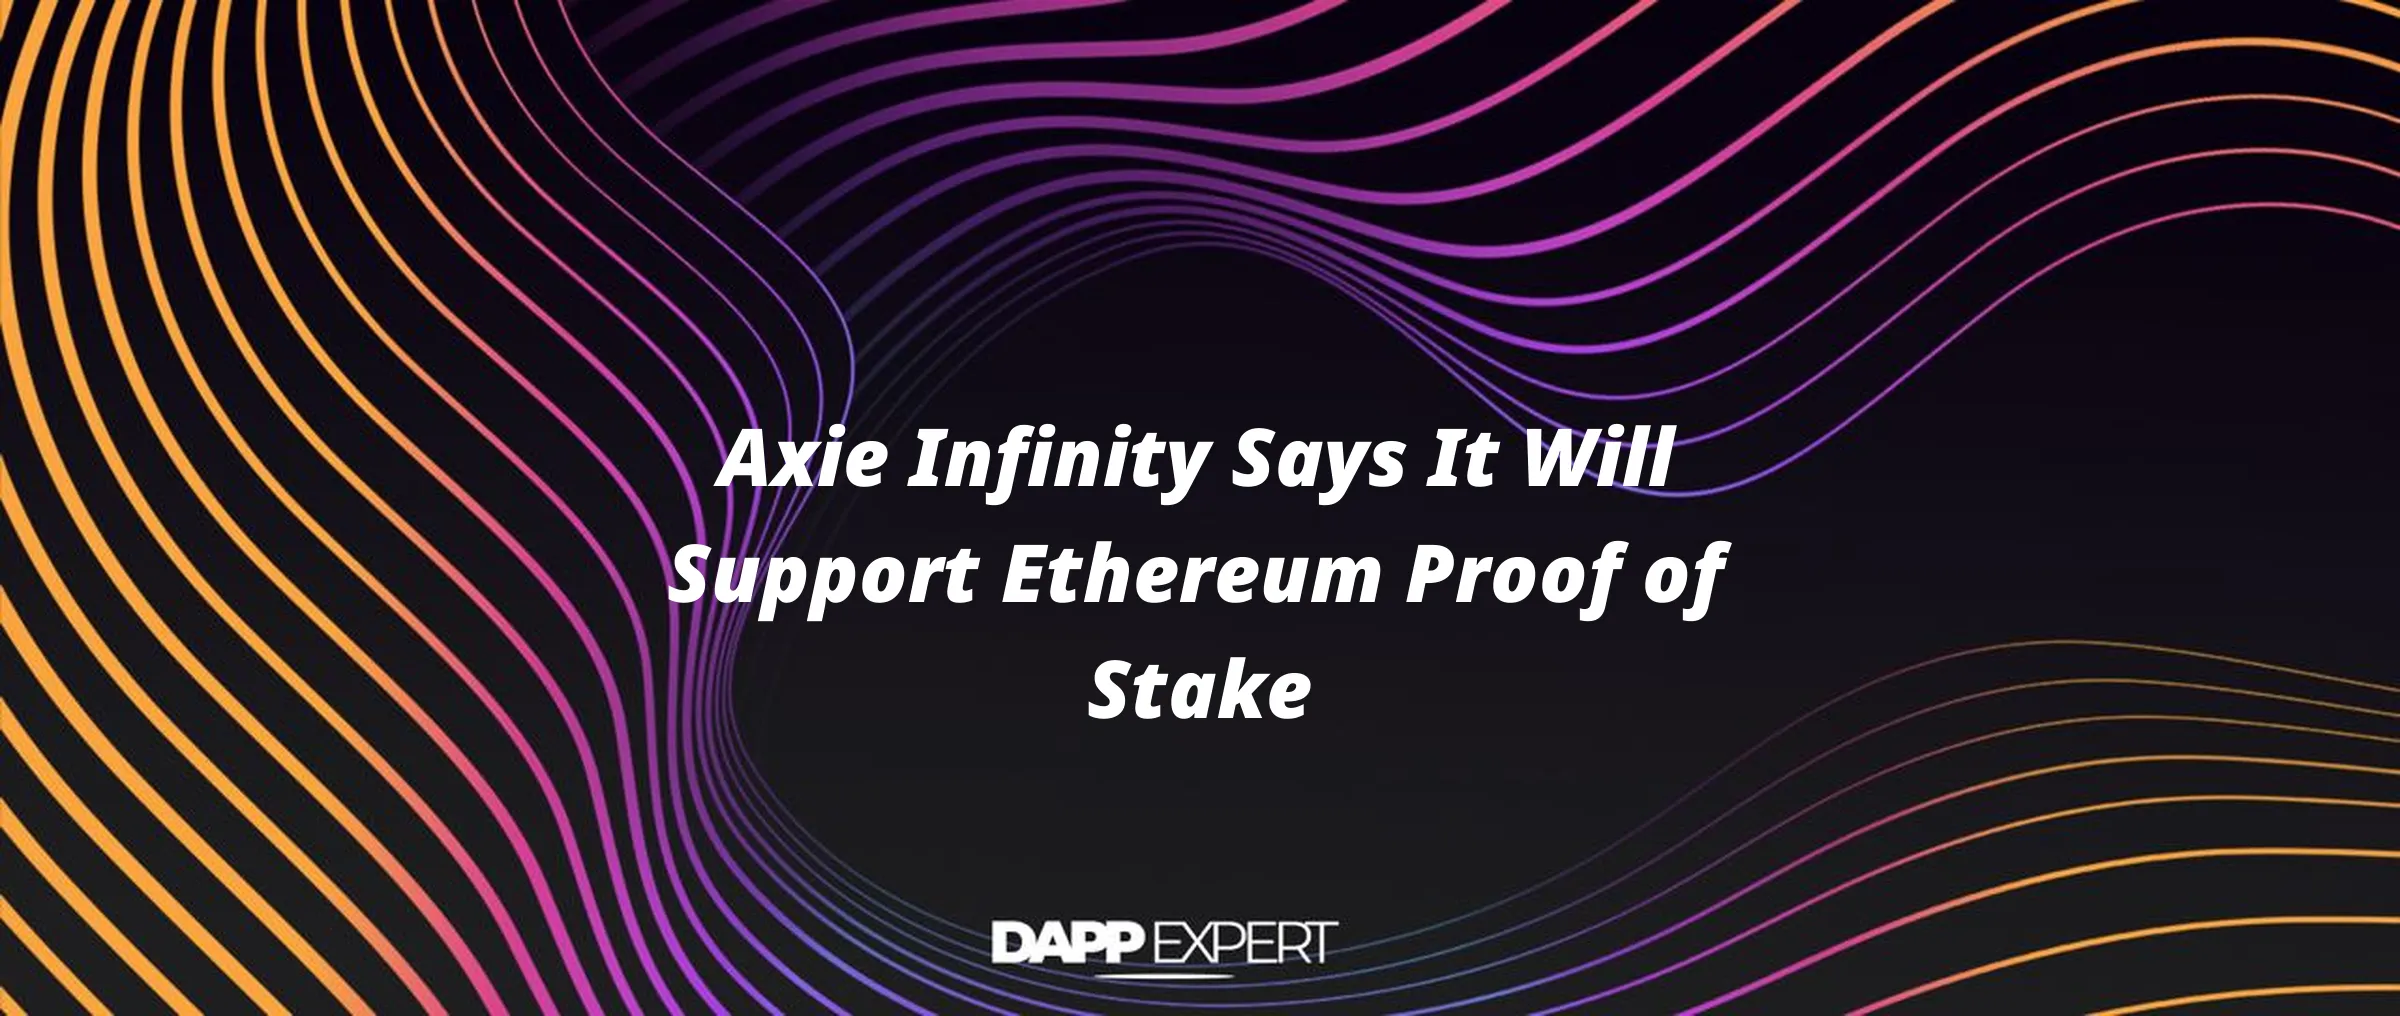 Axie Infinity Says It Will Support Ethereum Proof of Stake